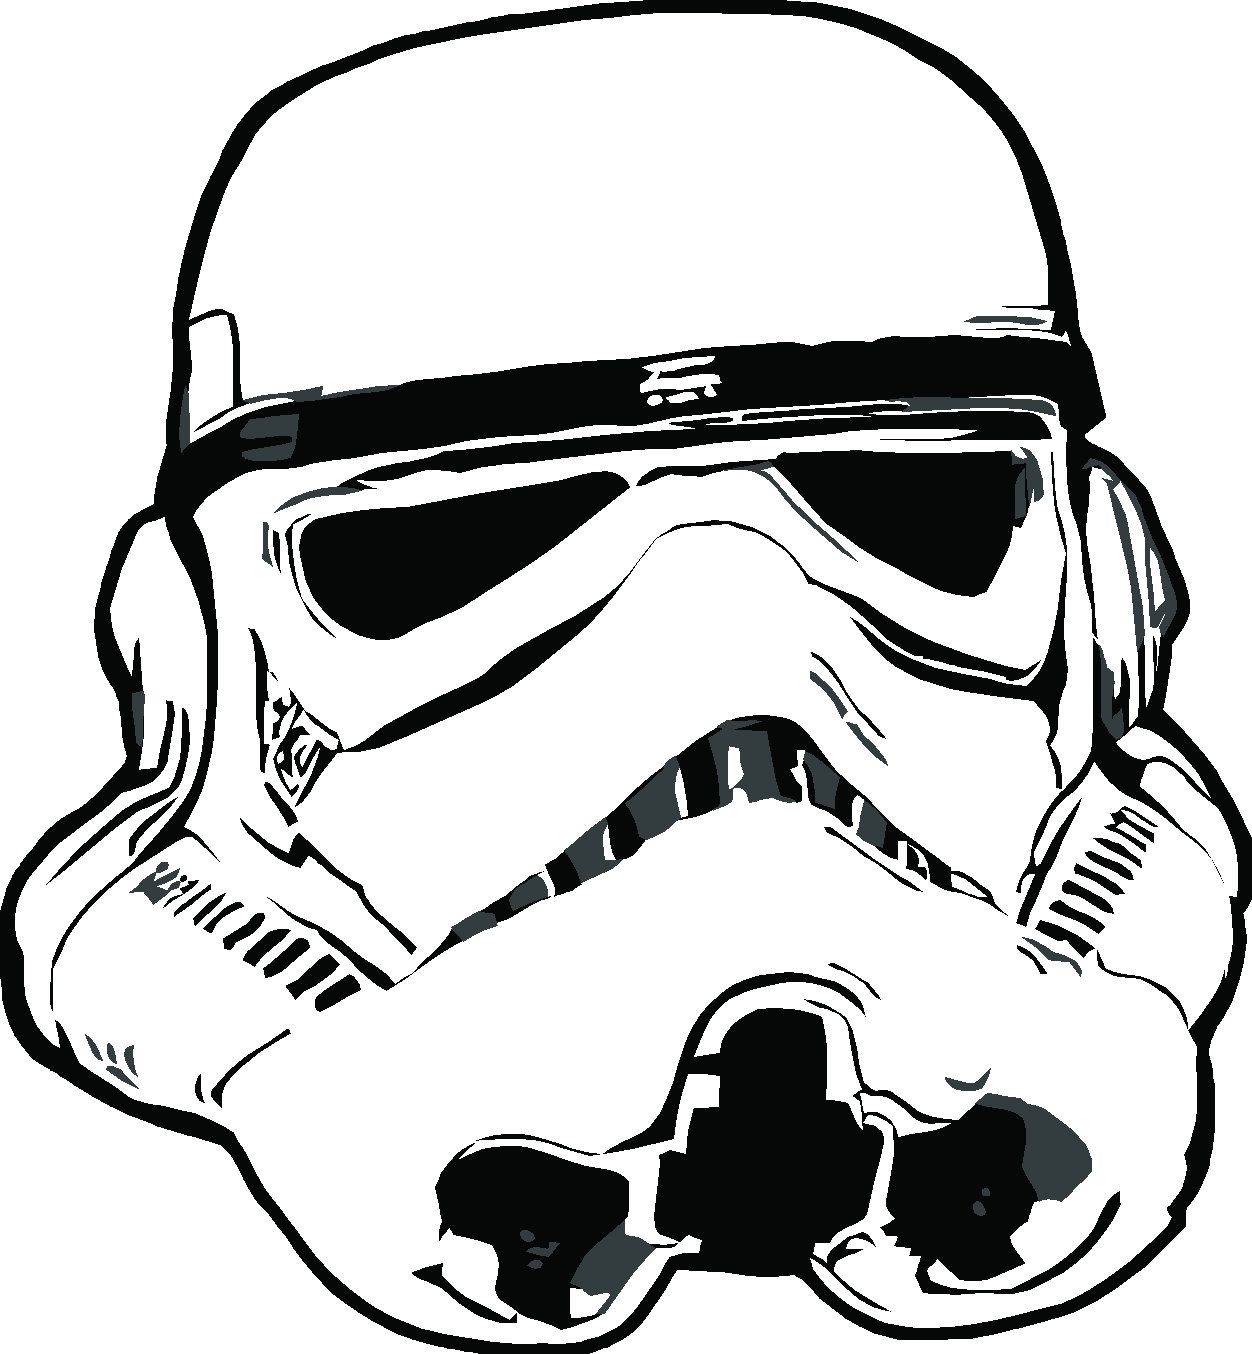 Stormtrooper Helmet Coloring Page - Coloring Home